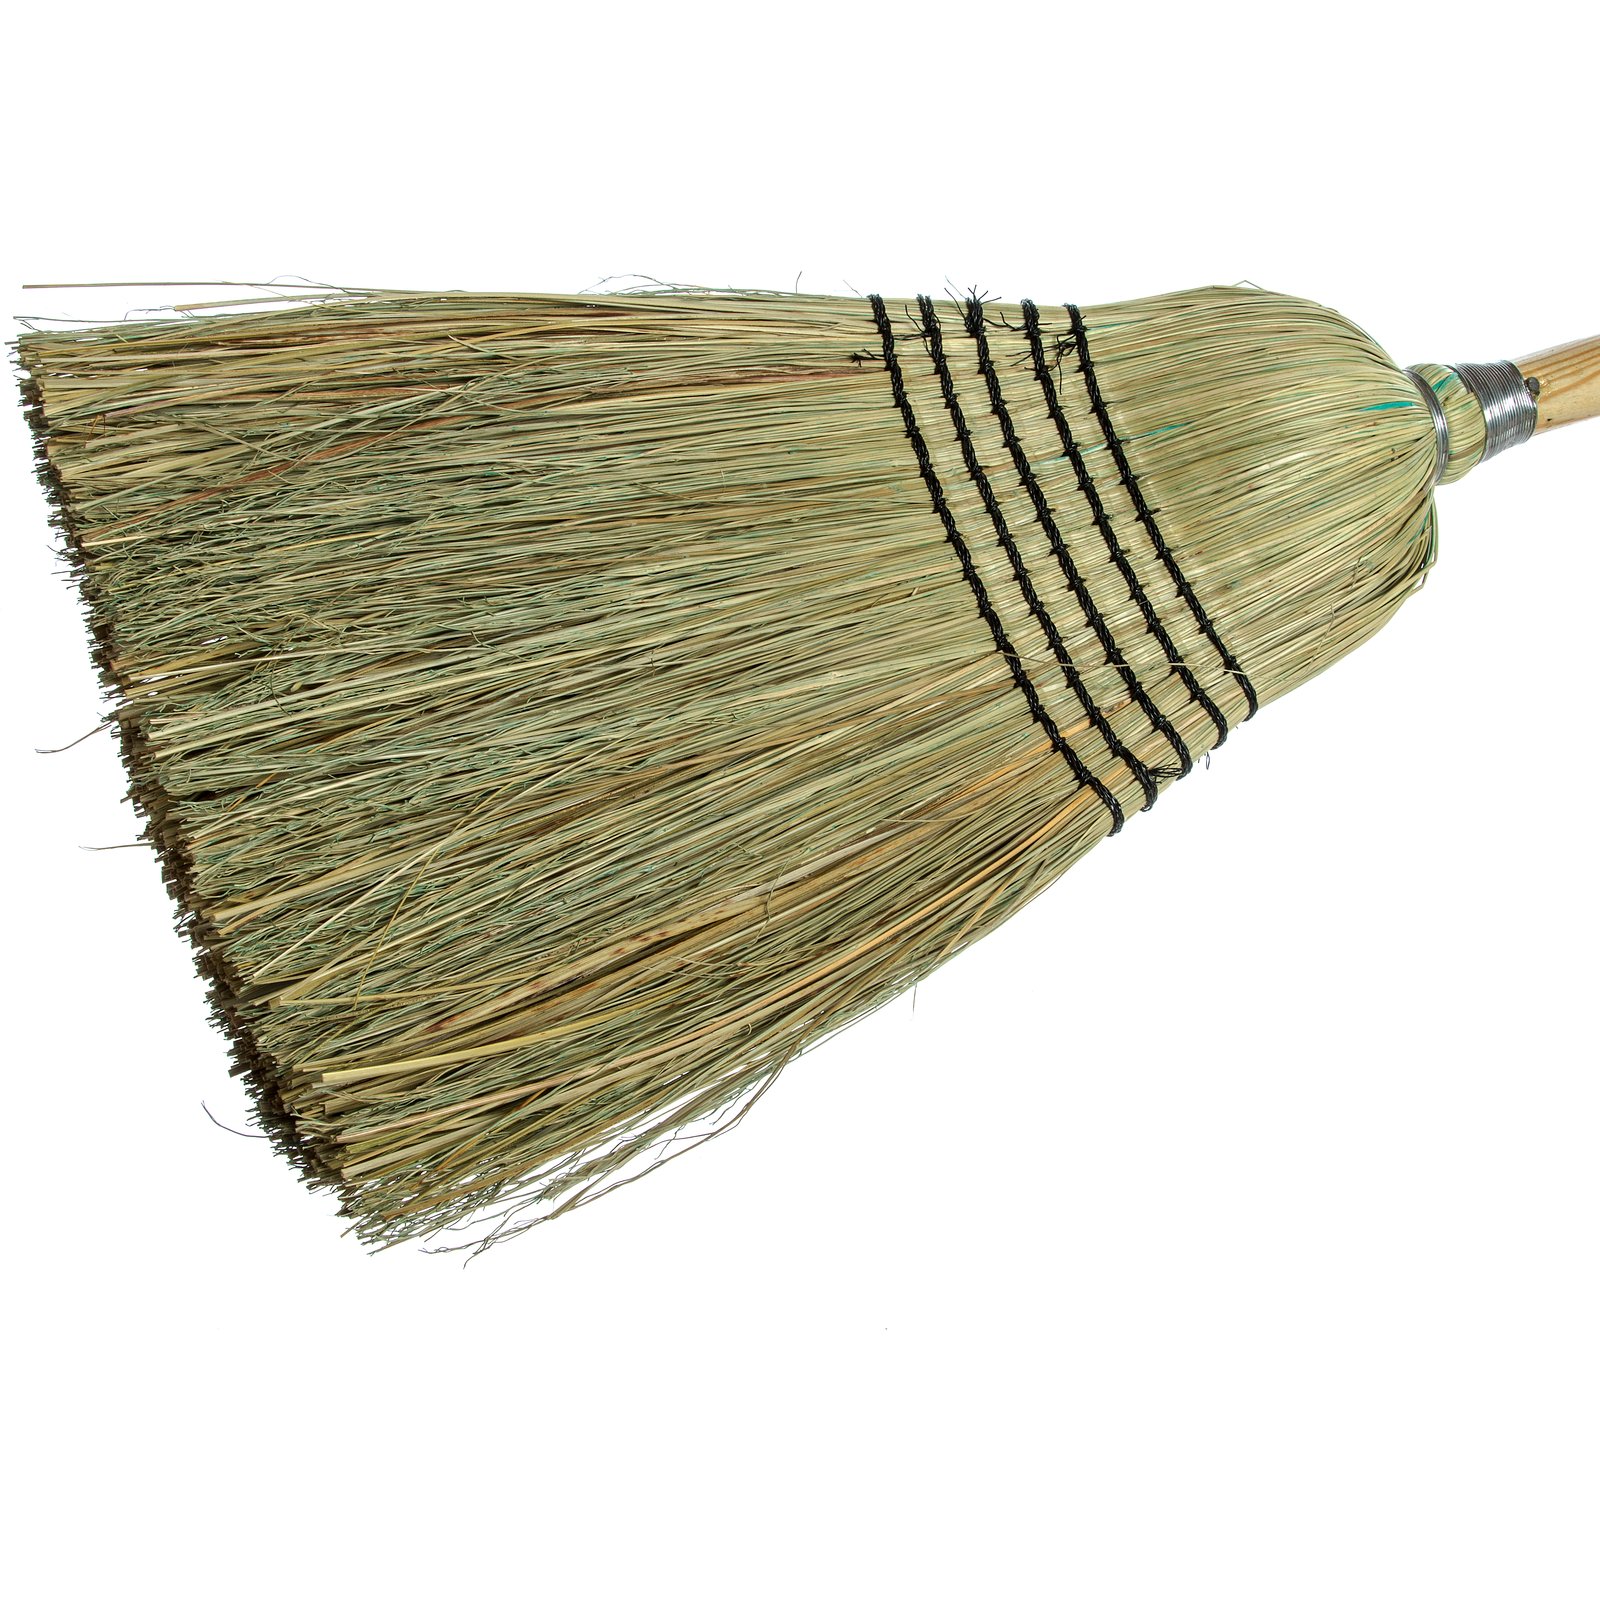 4135067 - 5-Stitch Warehouse/Janitor (#29) - Blended Corn Broom 56 